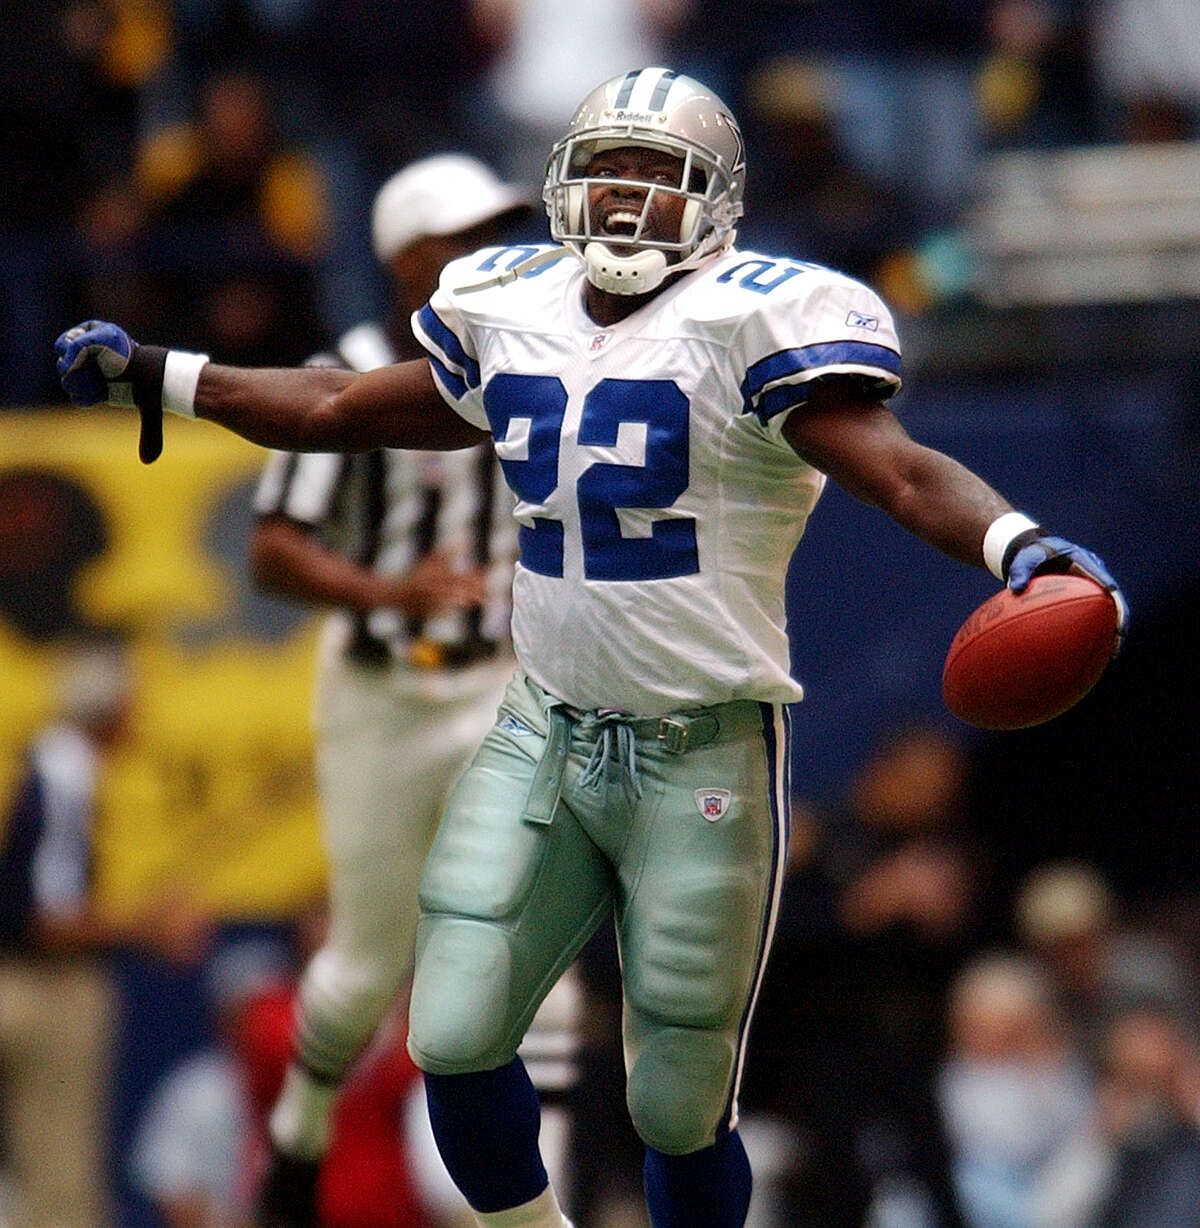 Emmitt Smith, who set a new NFL rushing record in 2002, is among some 350 Palmaz Scientific investors who could lose their investment in the now-bankrupt biotech company.